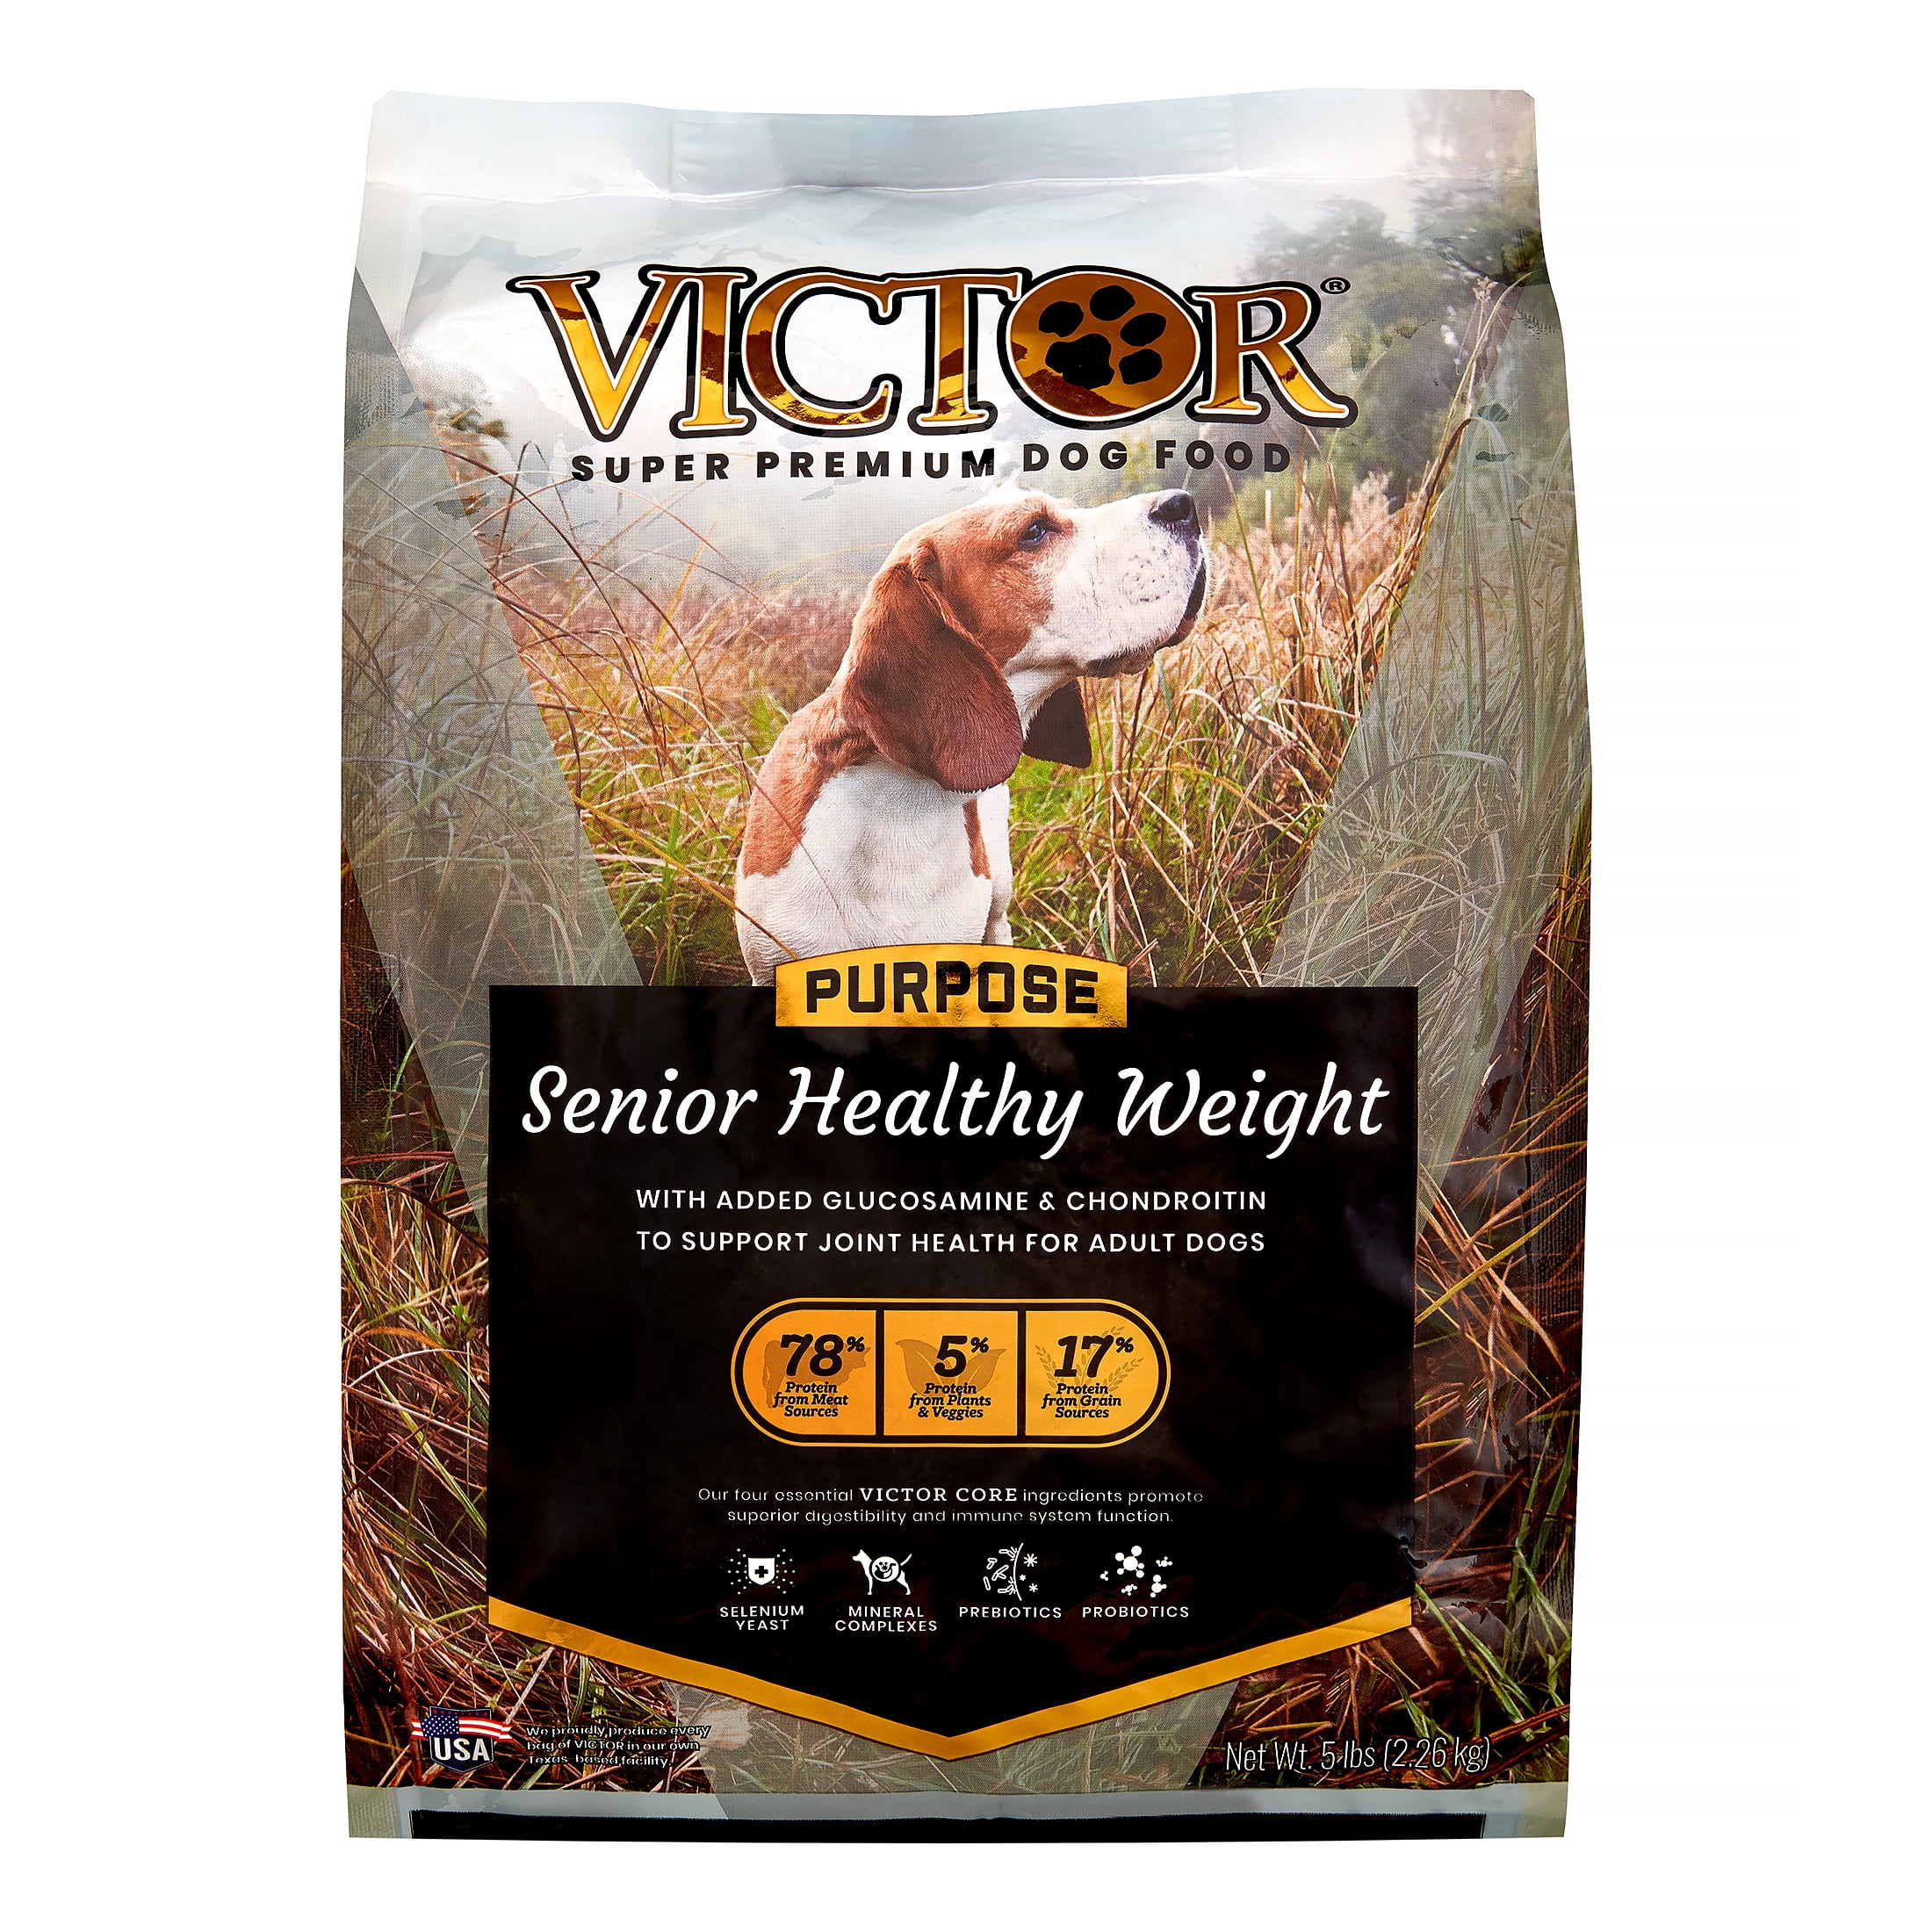 10 Best Victor Senior Dog Foods A Complete Review And Buying Guide